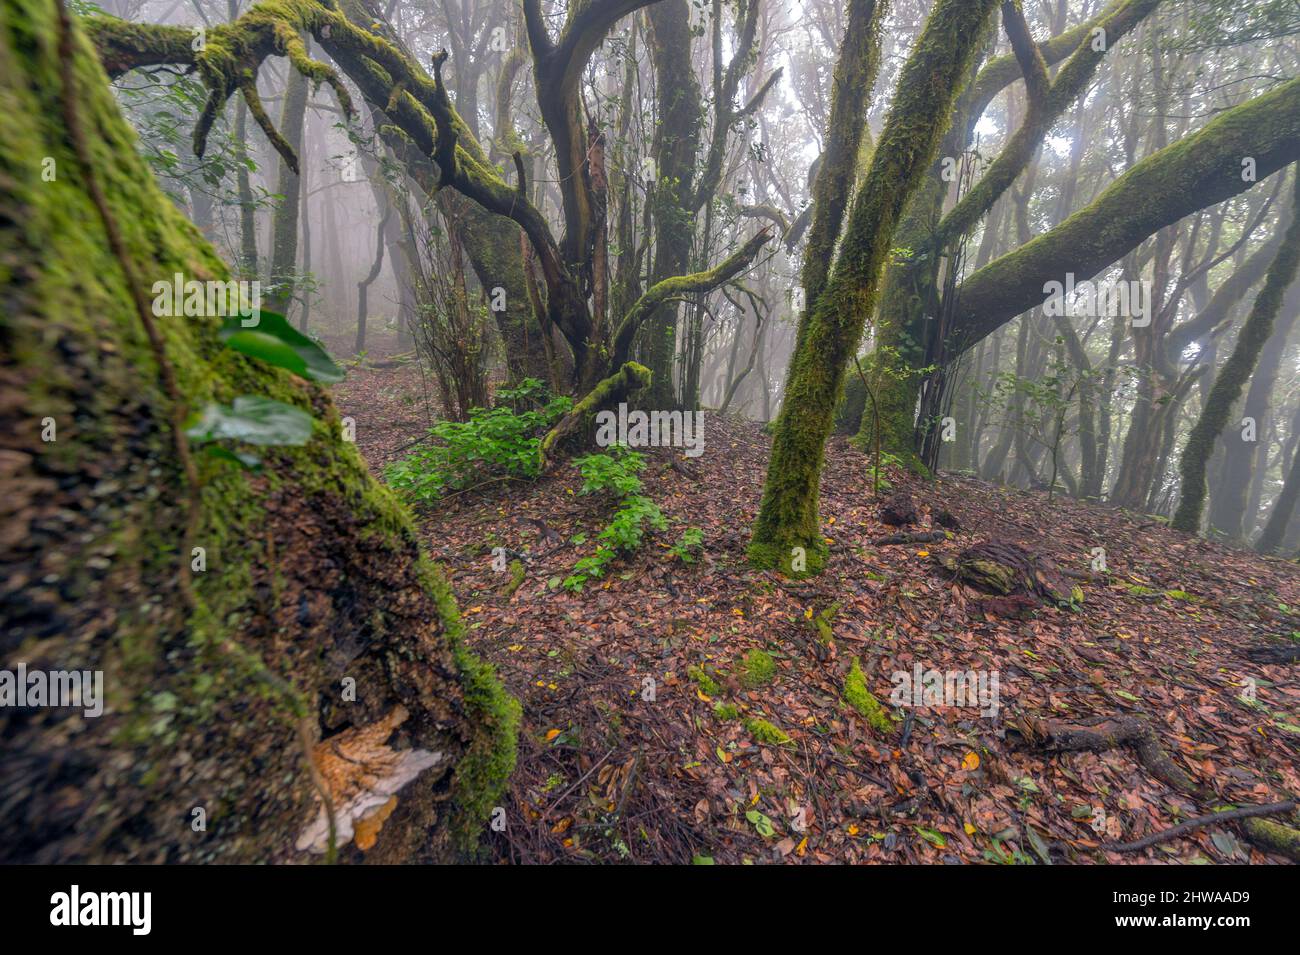 Laurel forest at the Garajonay National Park, Canary Islands, La Gomera, Garajonay National Park Stock Photo